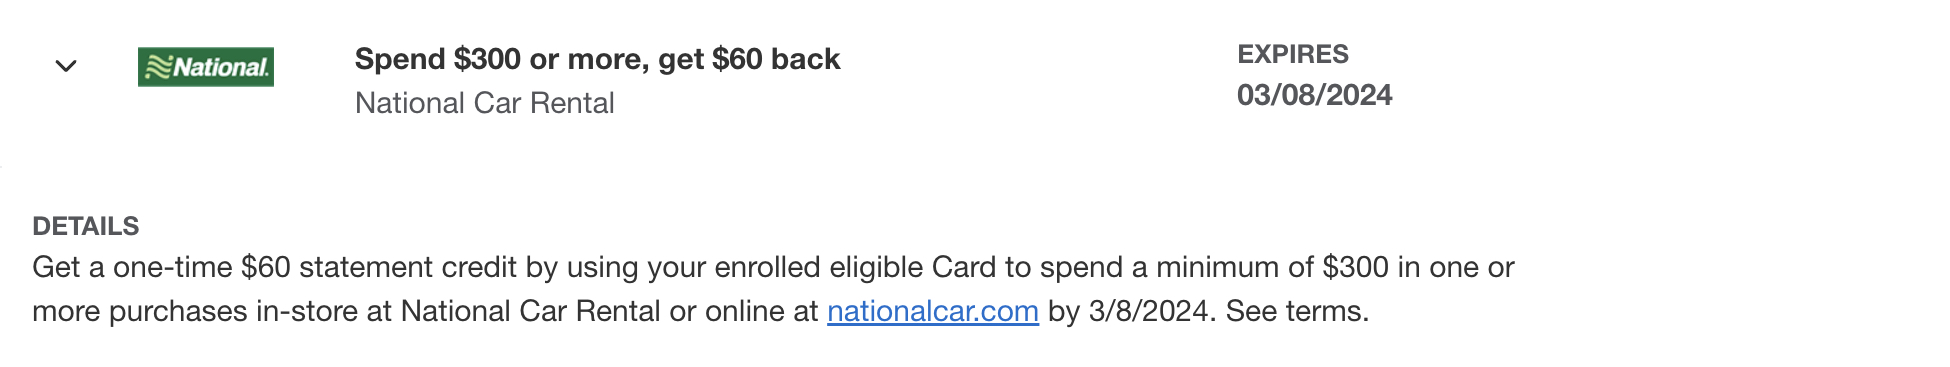 Amex Offer National